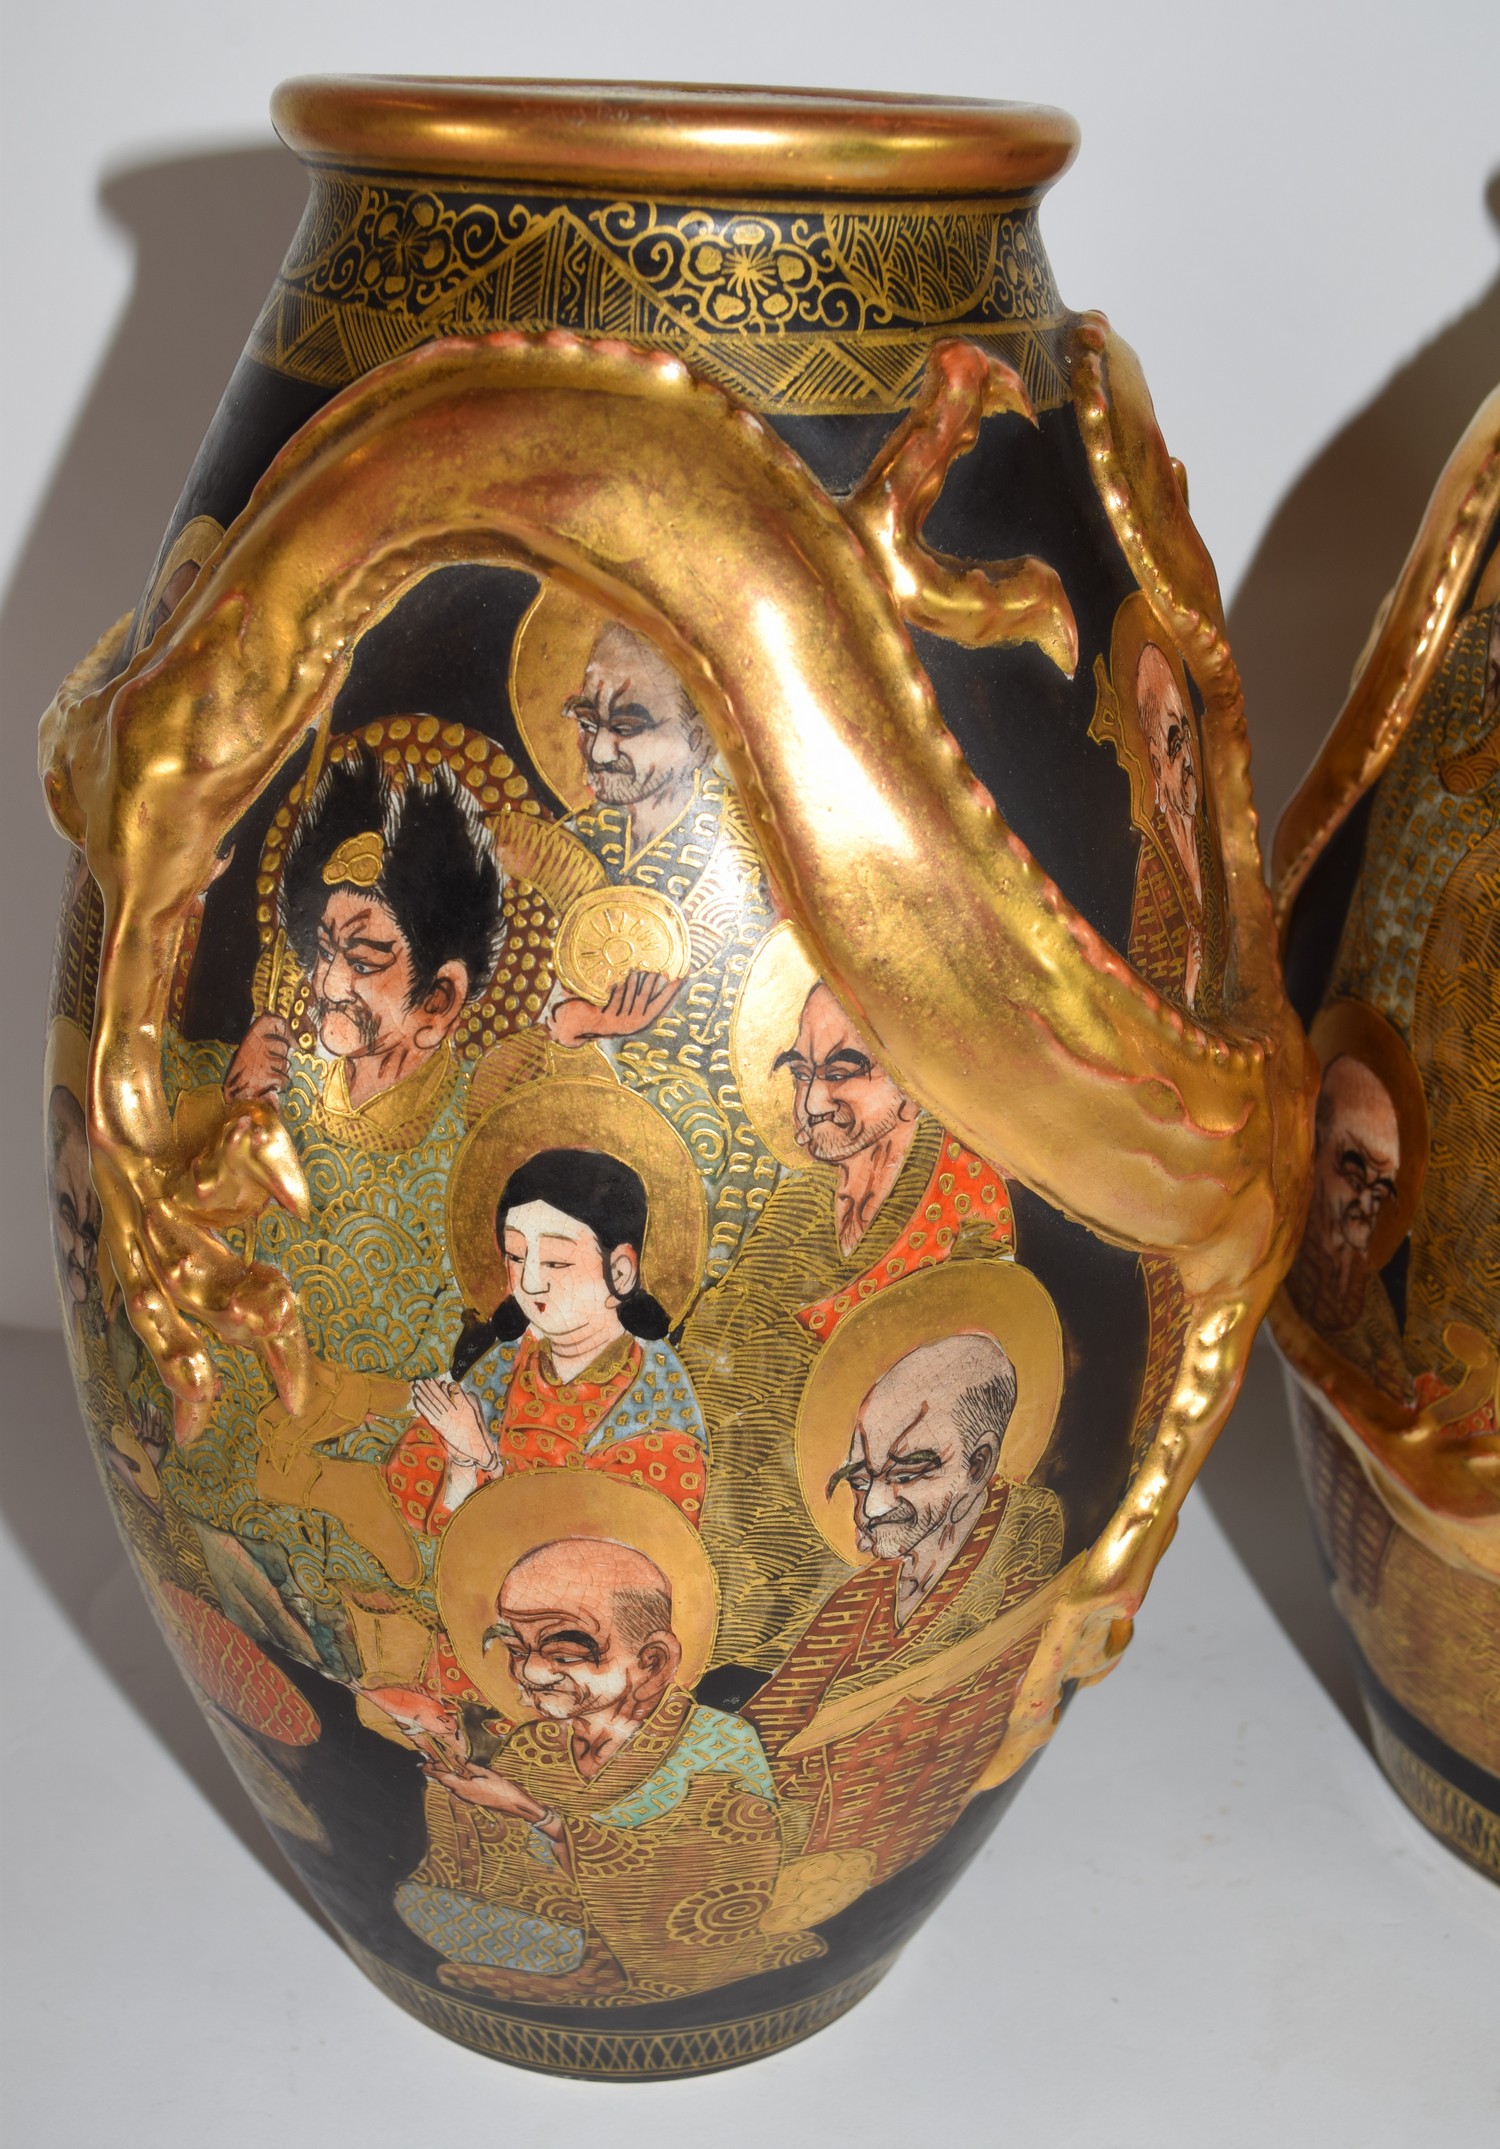 Pair of Satsuma vases, the black ground decorated with sages in gilt, together with dragons modelled - Image 2 of 2